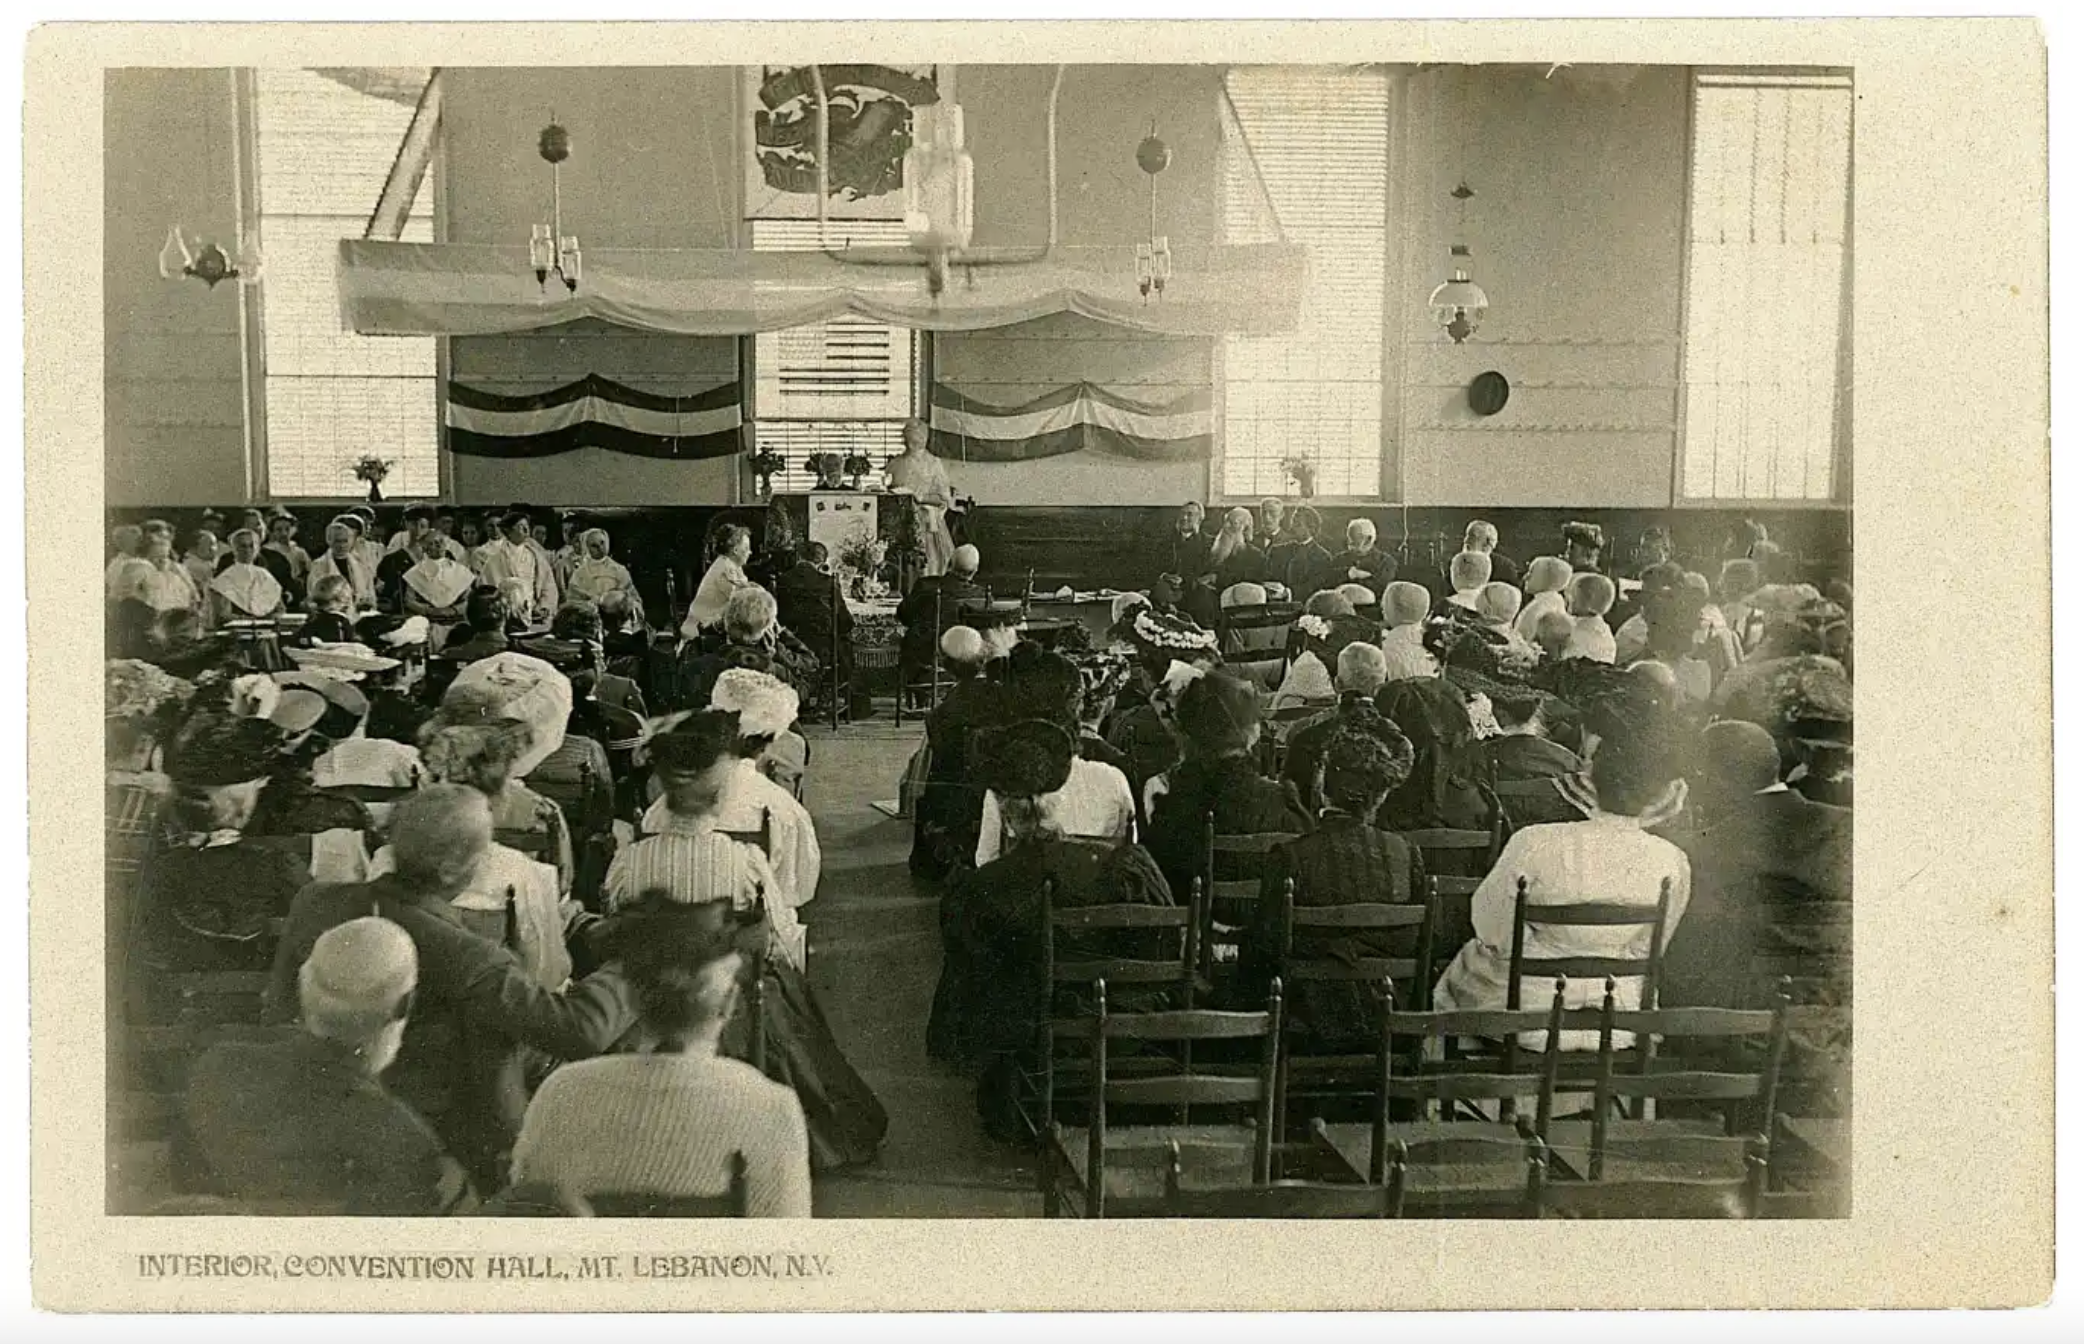 Postcard of the Shaker Peace Convention at Mount Lebanon, NY